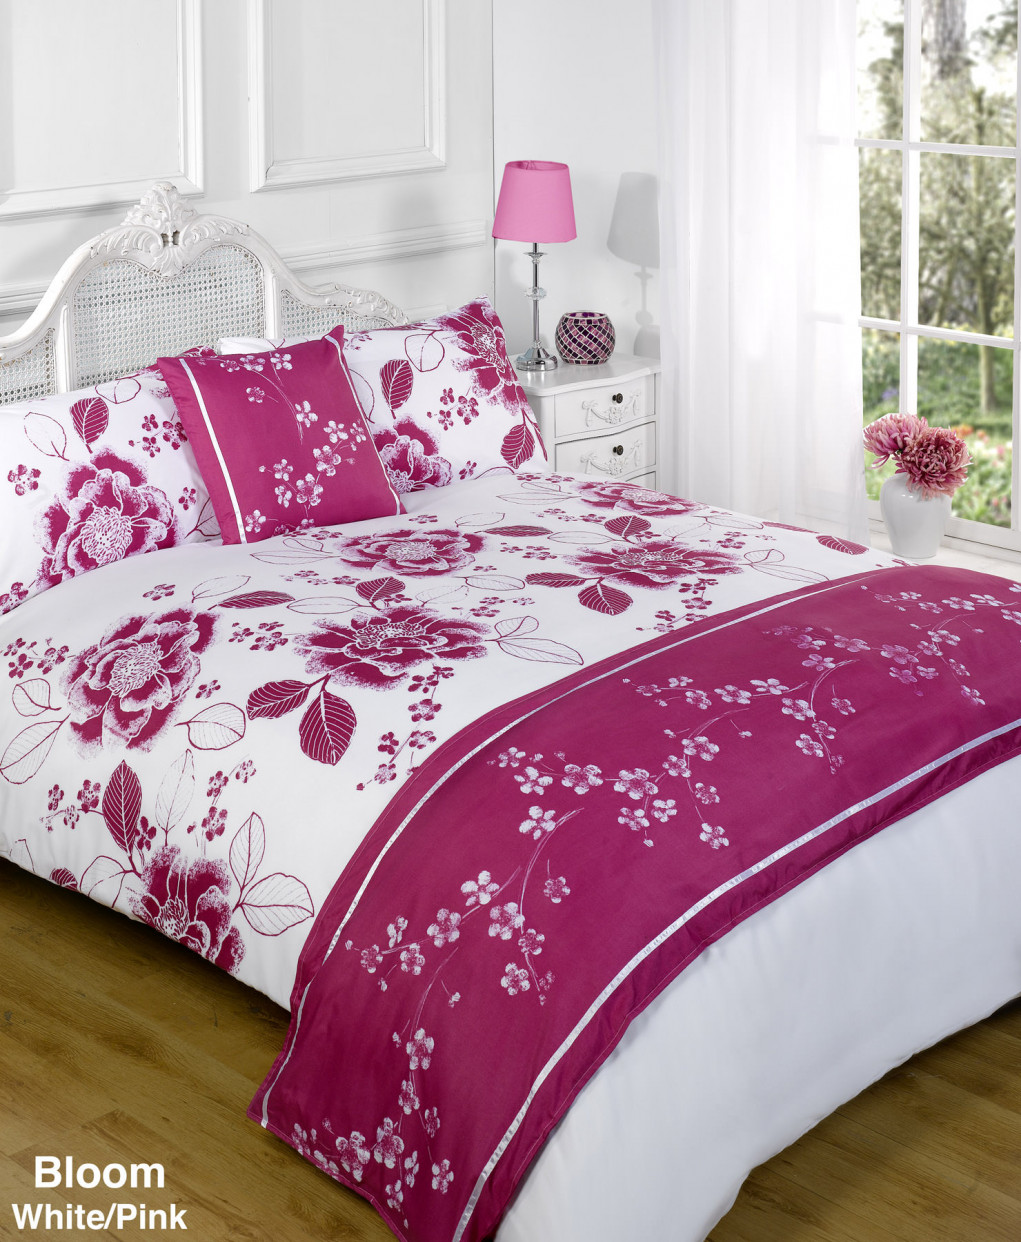 Bloom Bed In A Bag Duvet Cover Set Double - White  >